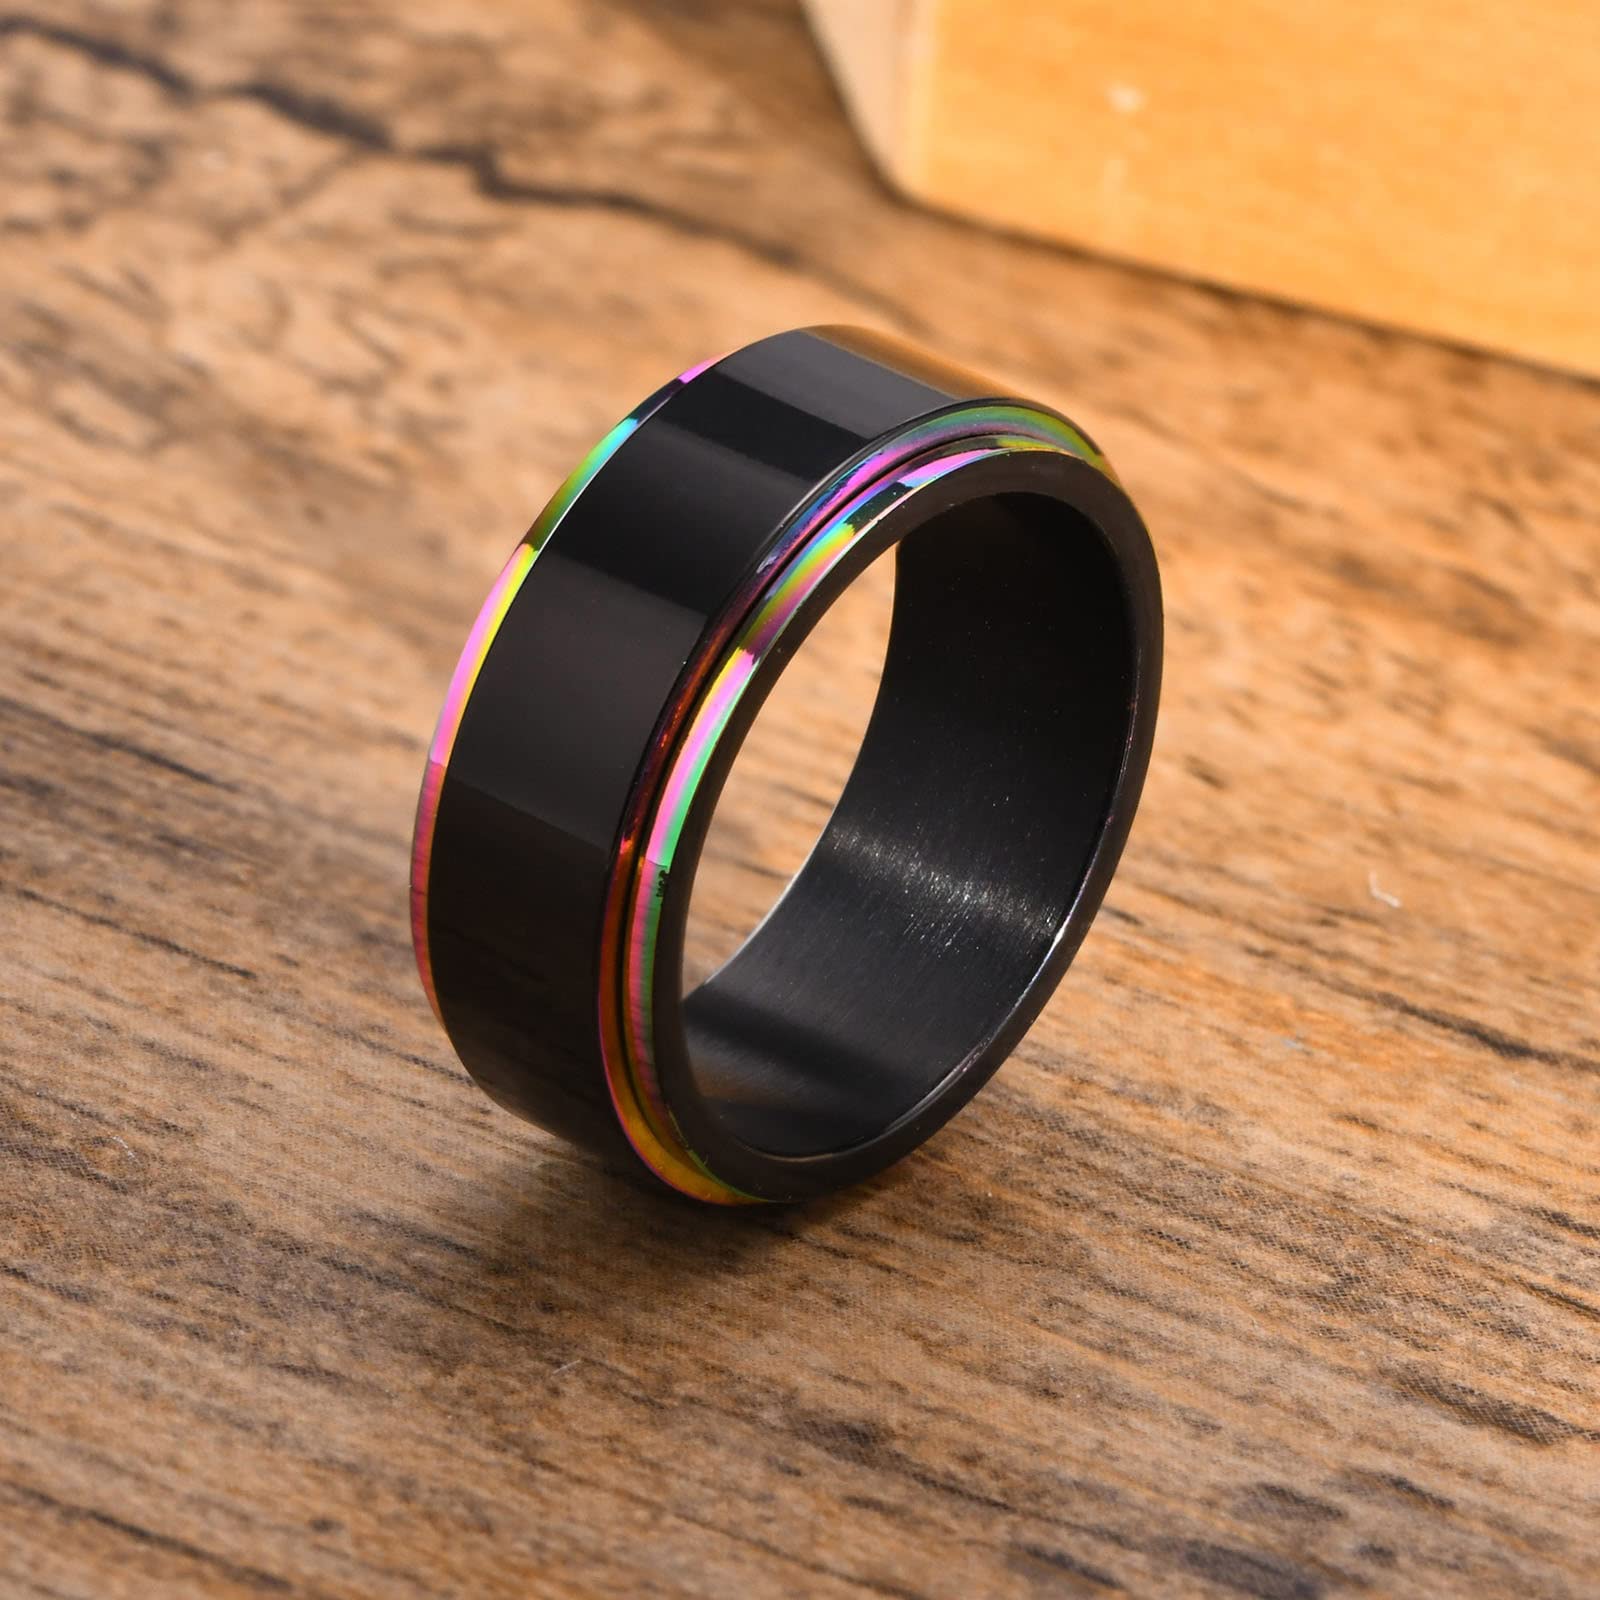 MZZJ Her Weirdo&His Crazy Couple Ring 8MM&6MM Black Polish 2 Tone Stainless Steel Rainbow Step Edge Spinner Rings for Wedding Band Engagement for Him Her,Birthday Gift for Boyfriend Girlfriend